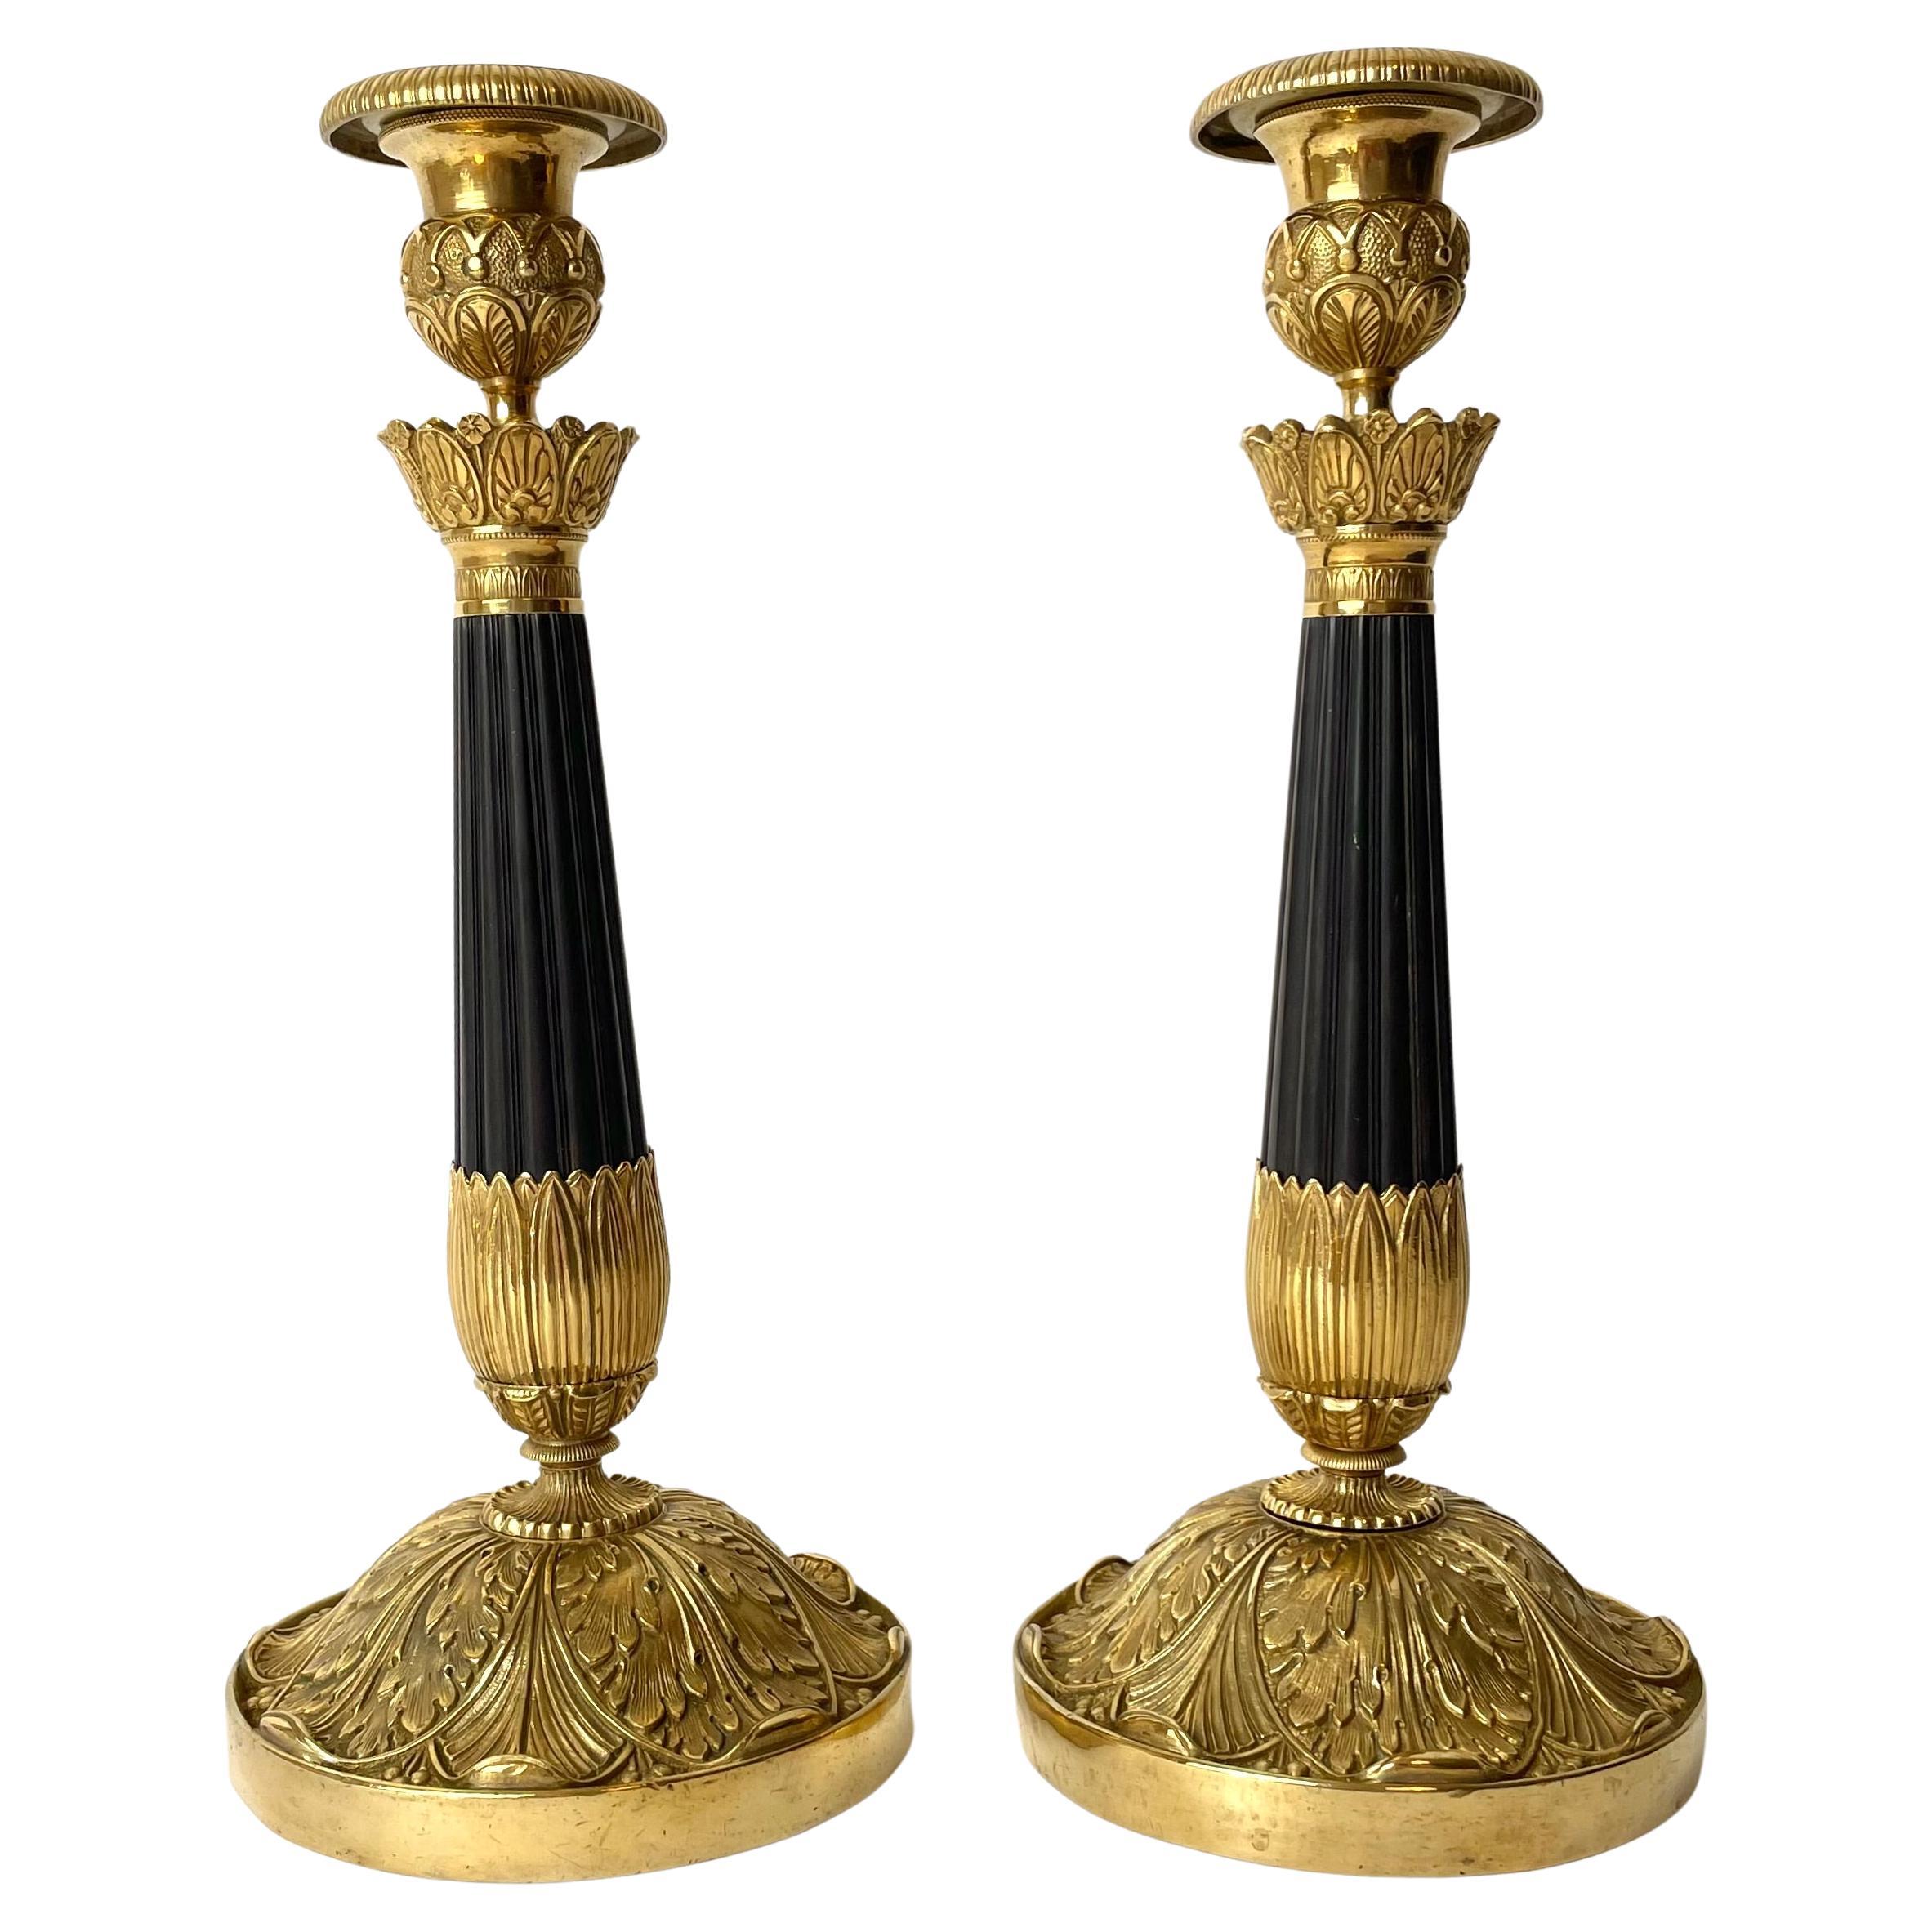 Pair of Empire Candlesticks, Gilded and Patinated Bronze, Early 19th Century